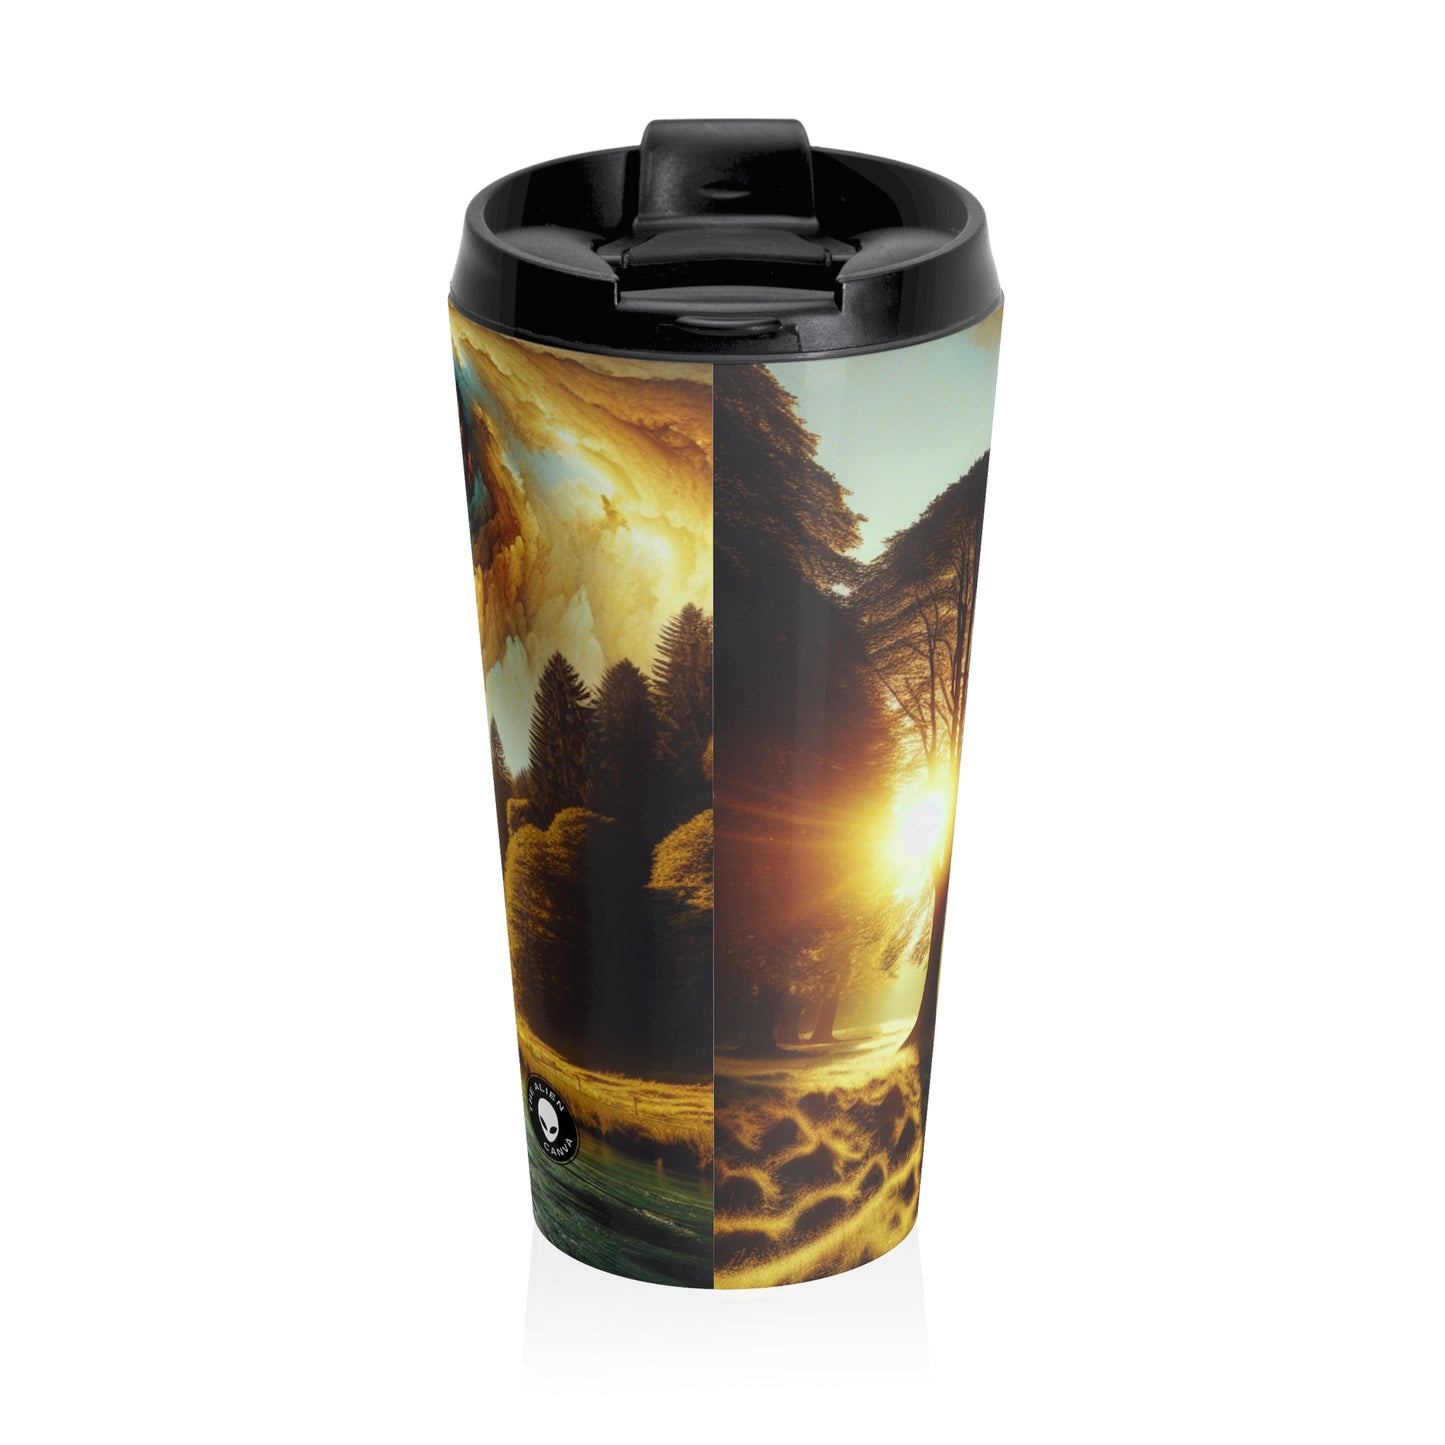 "Rebirth of the Forest: A Recycled Ecosystem" - The Alien Stainless Steel Travel Mug Environmental Art